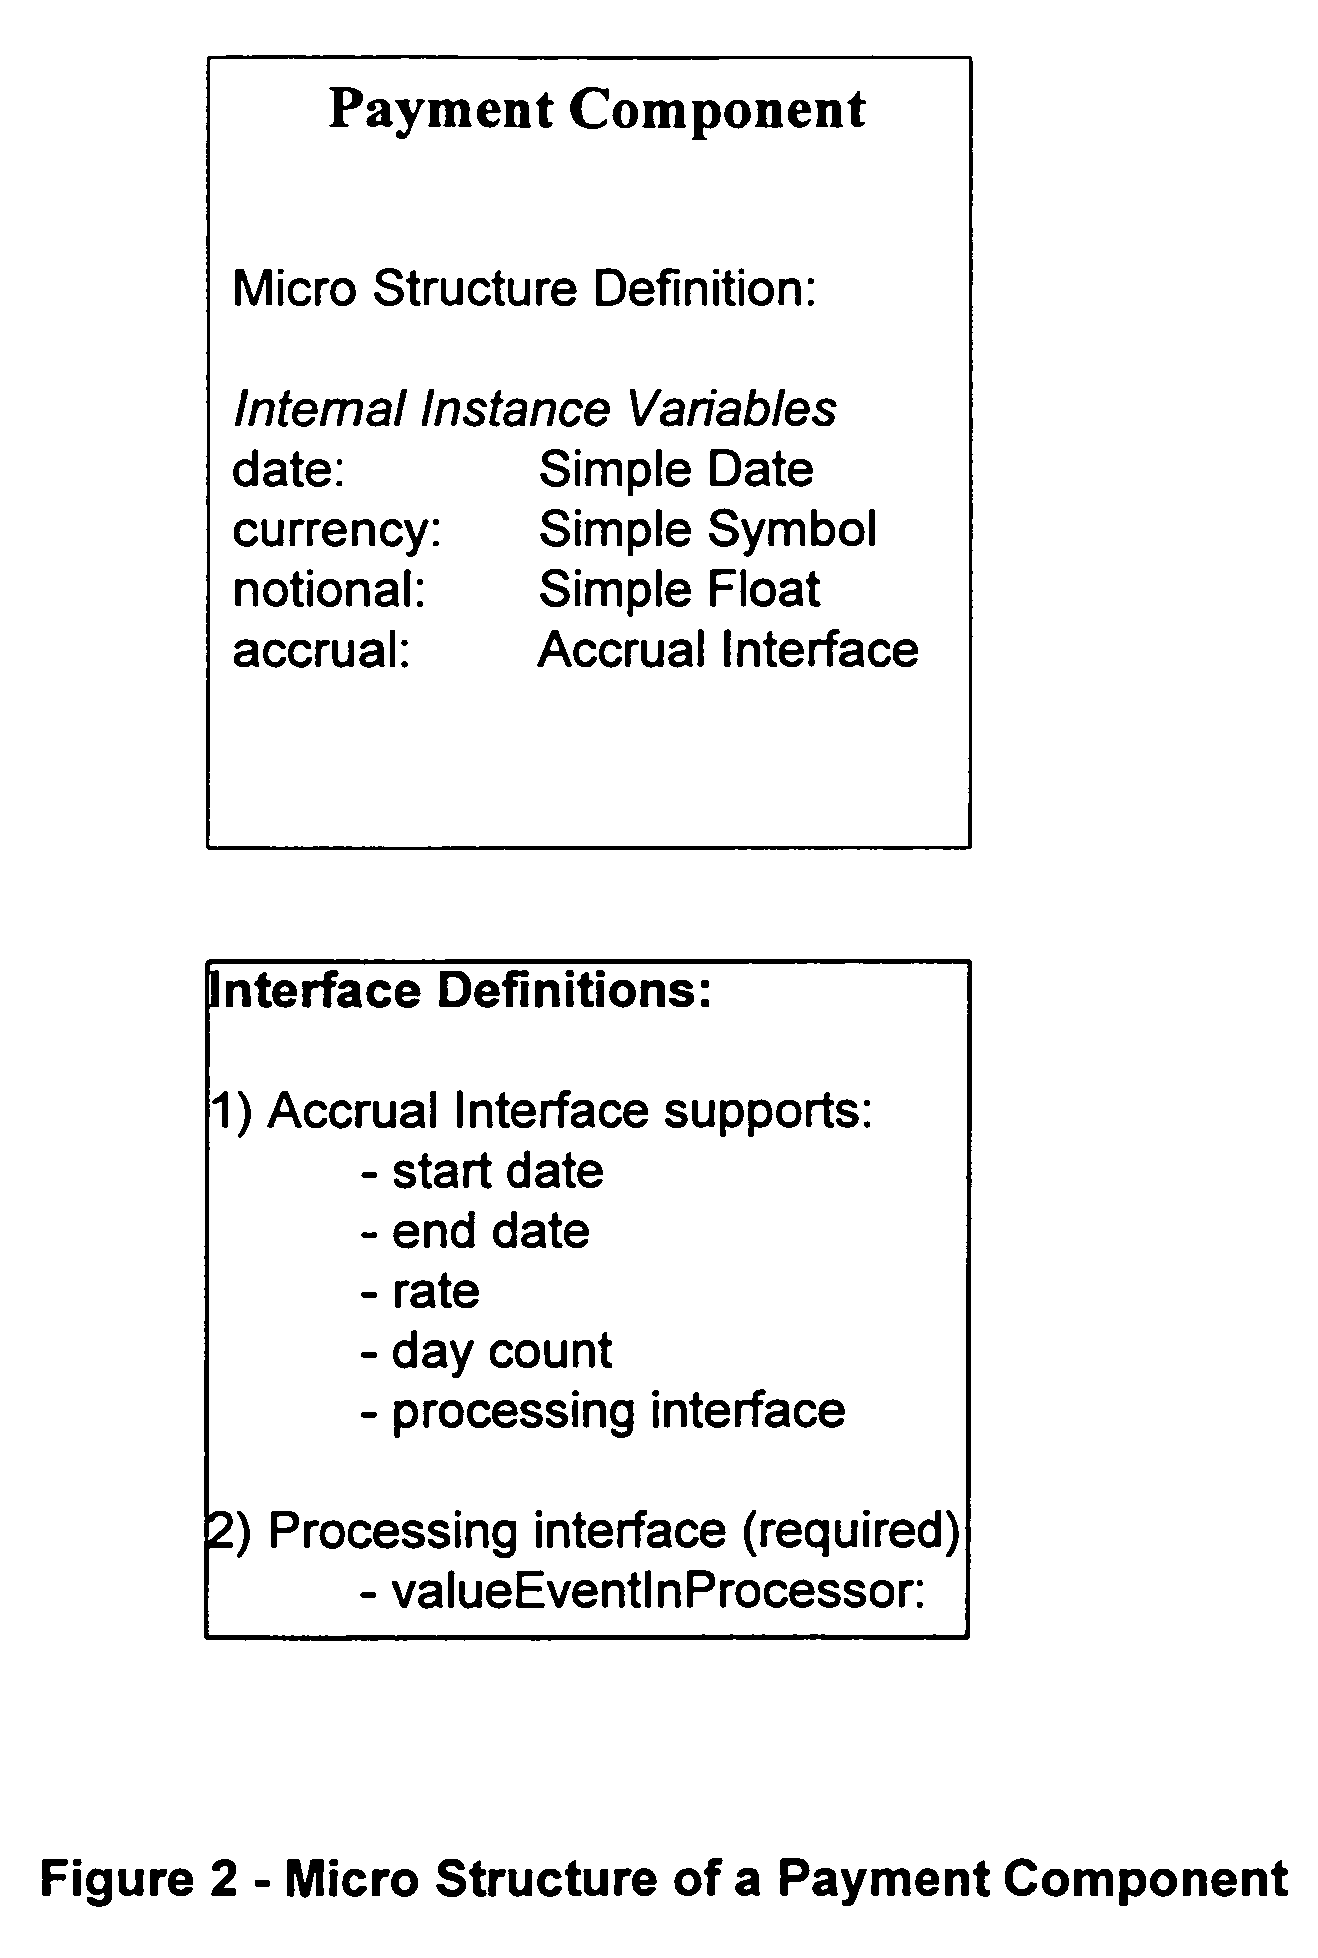 Object oriented system for managing complex financial instruments